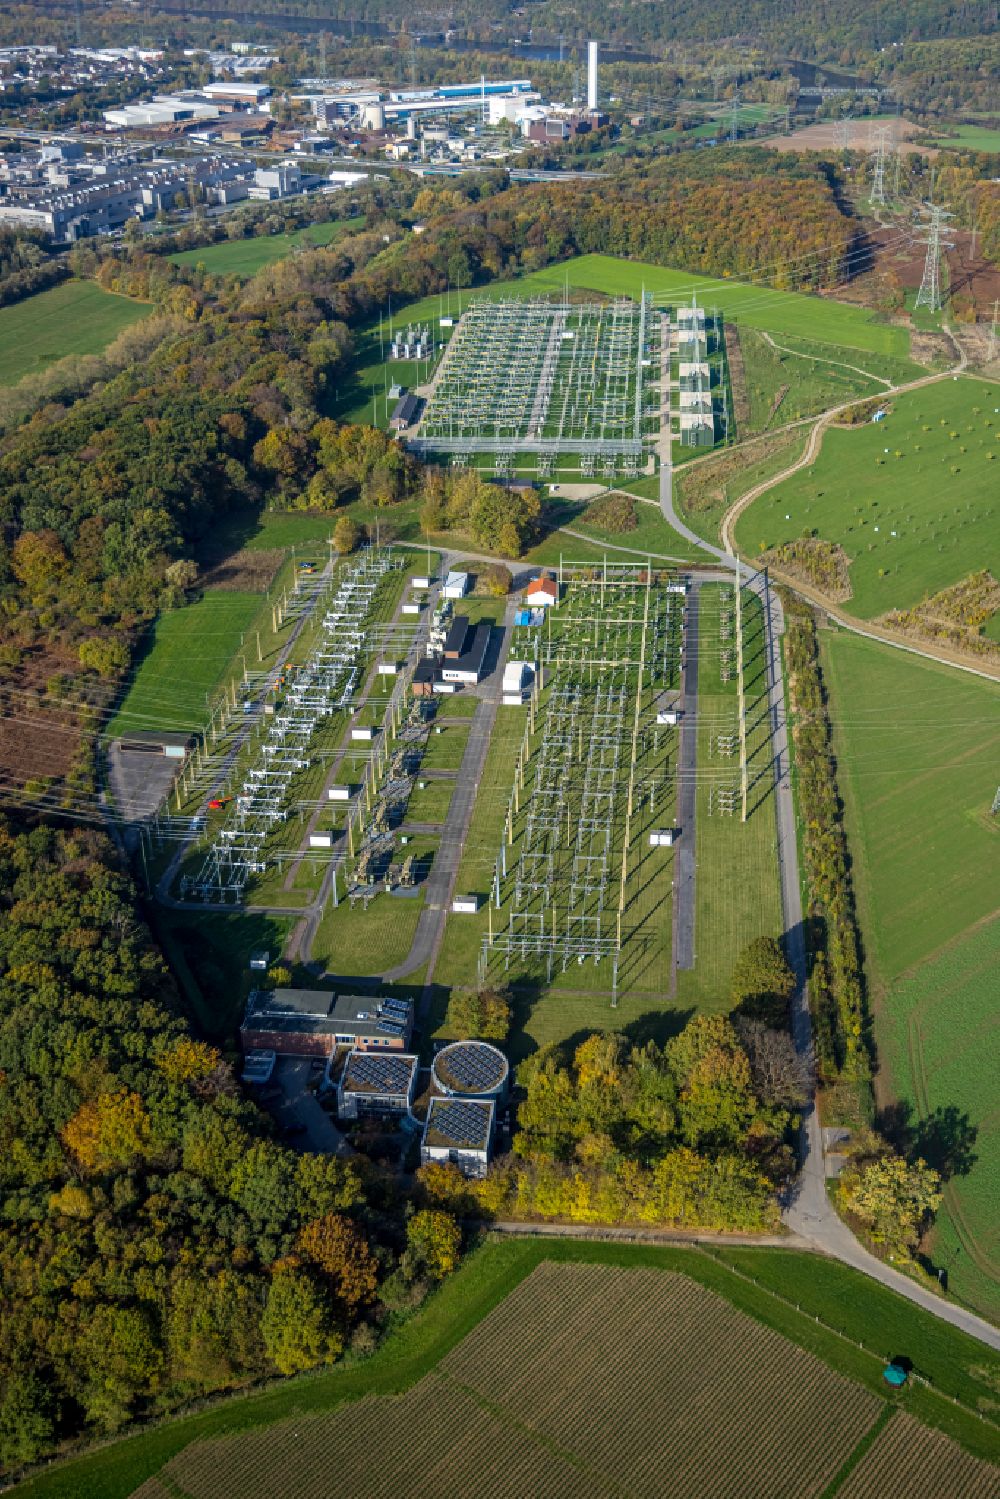 Aerial image Hagen - Site of the substation for voltage conversion and electrical power supply of Amprion GmbH in Hagen in the state North Rhine-Westphalia, Germany